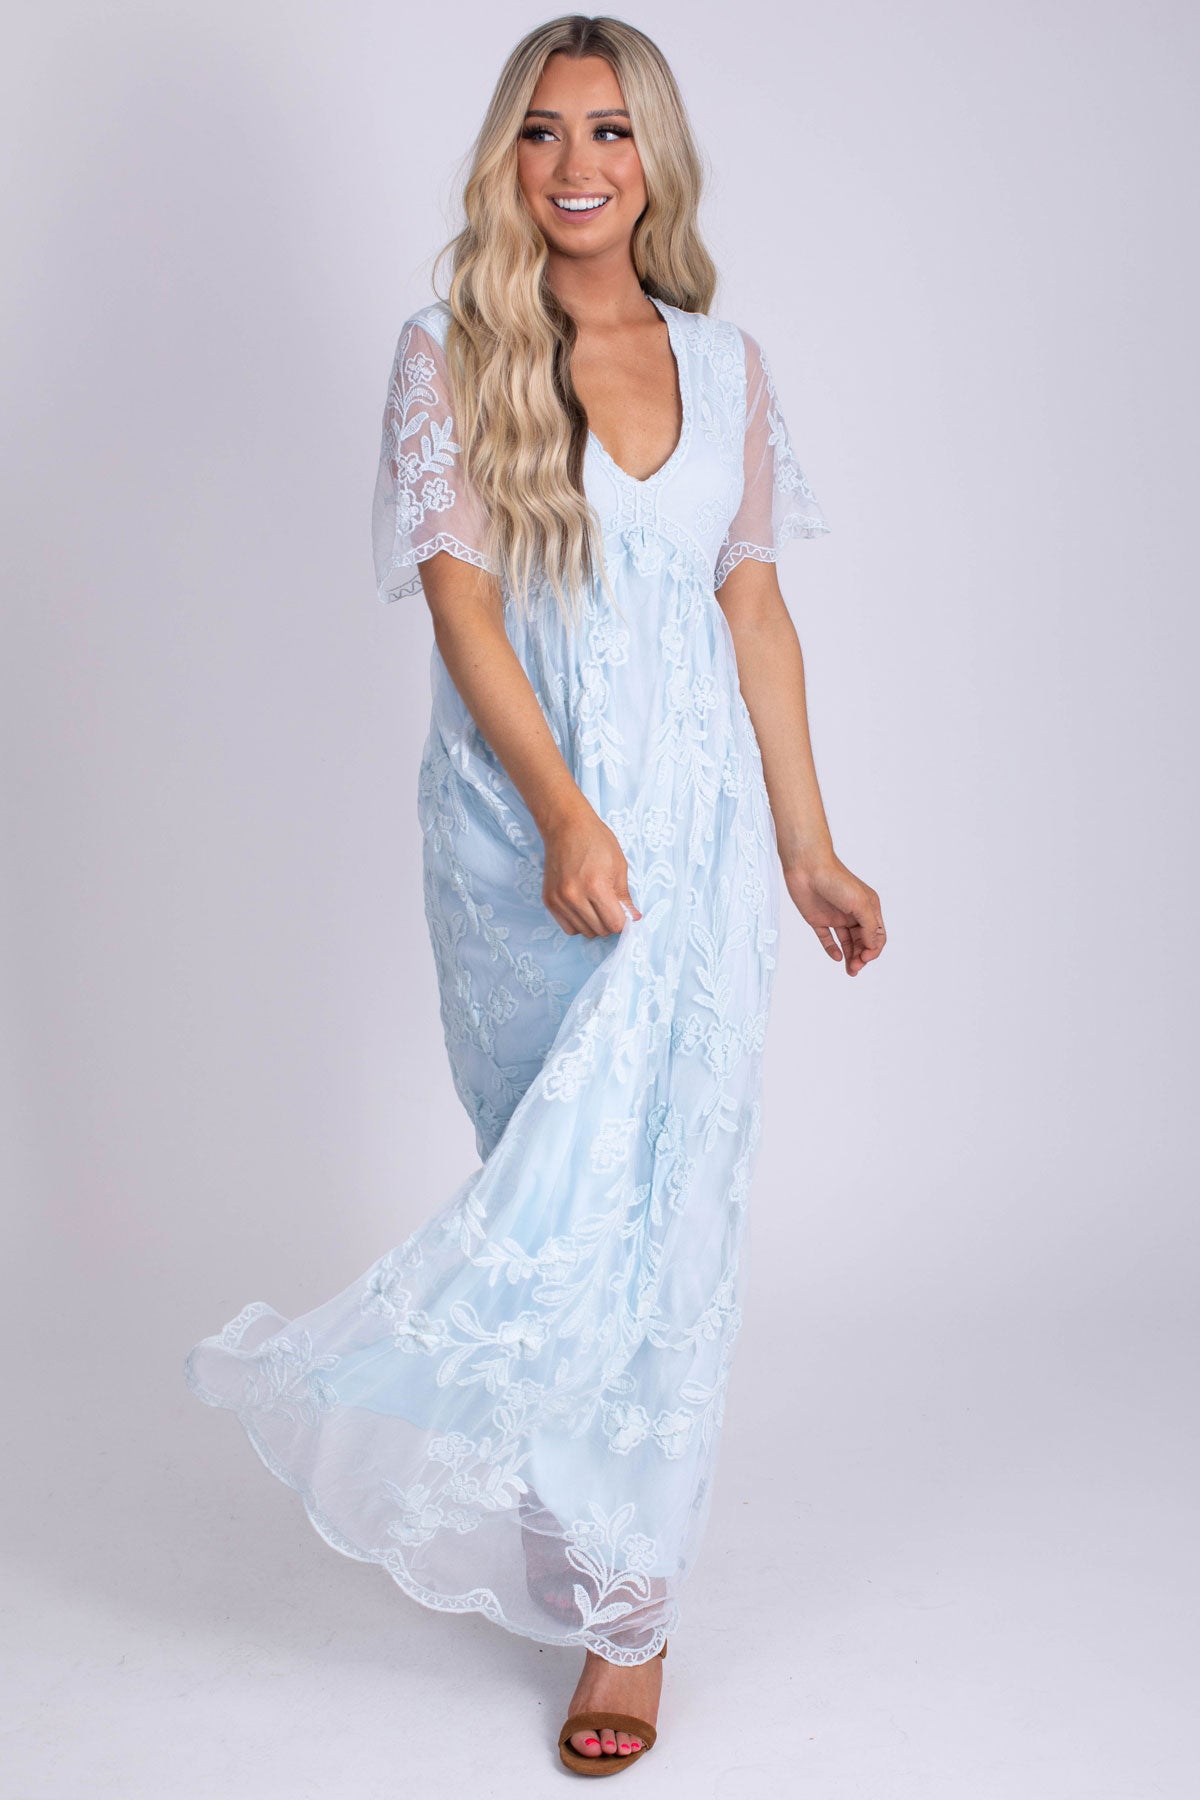 Lace Maxi Dress For Women